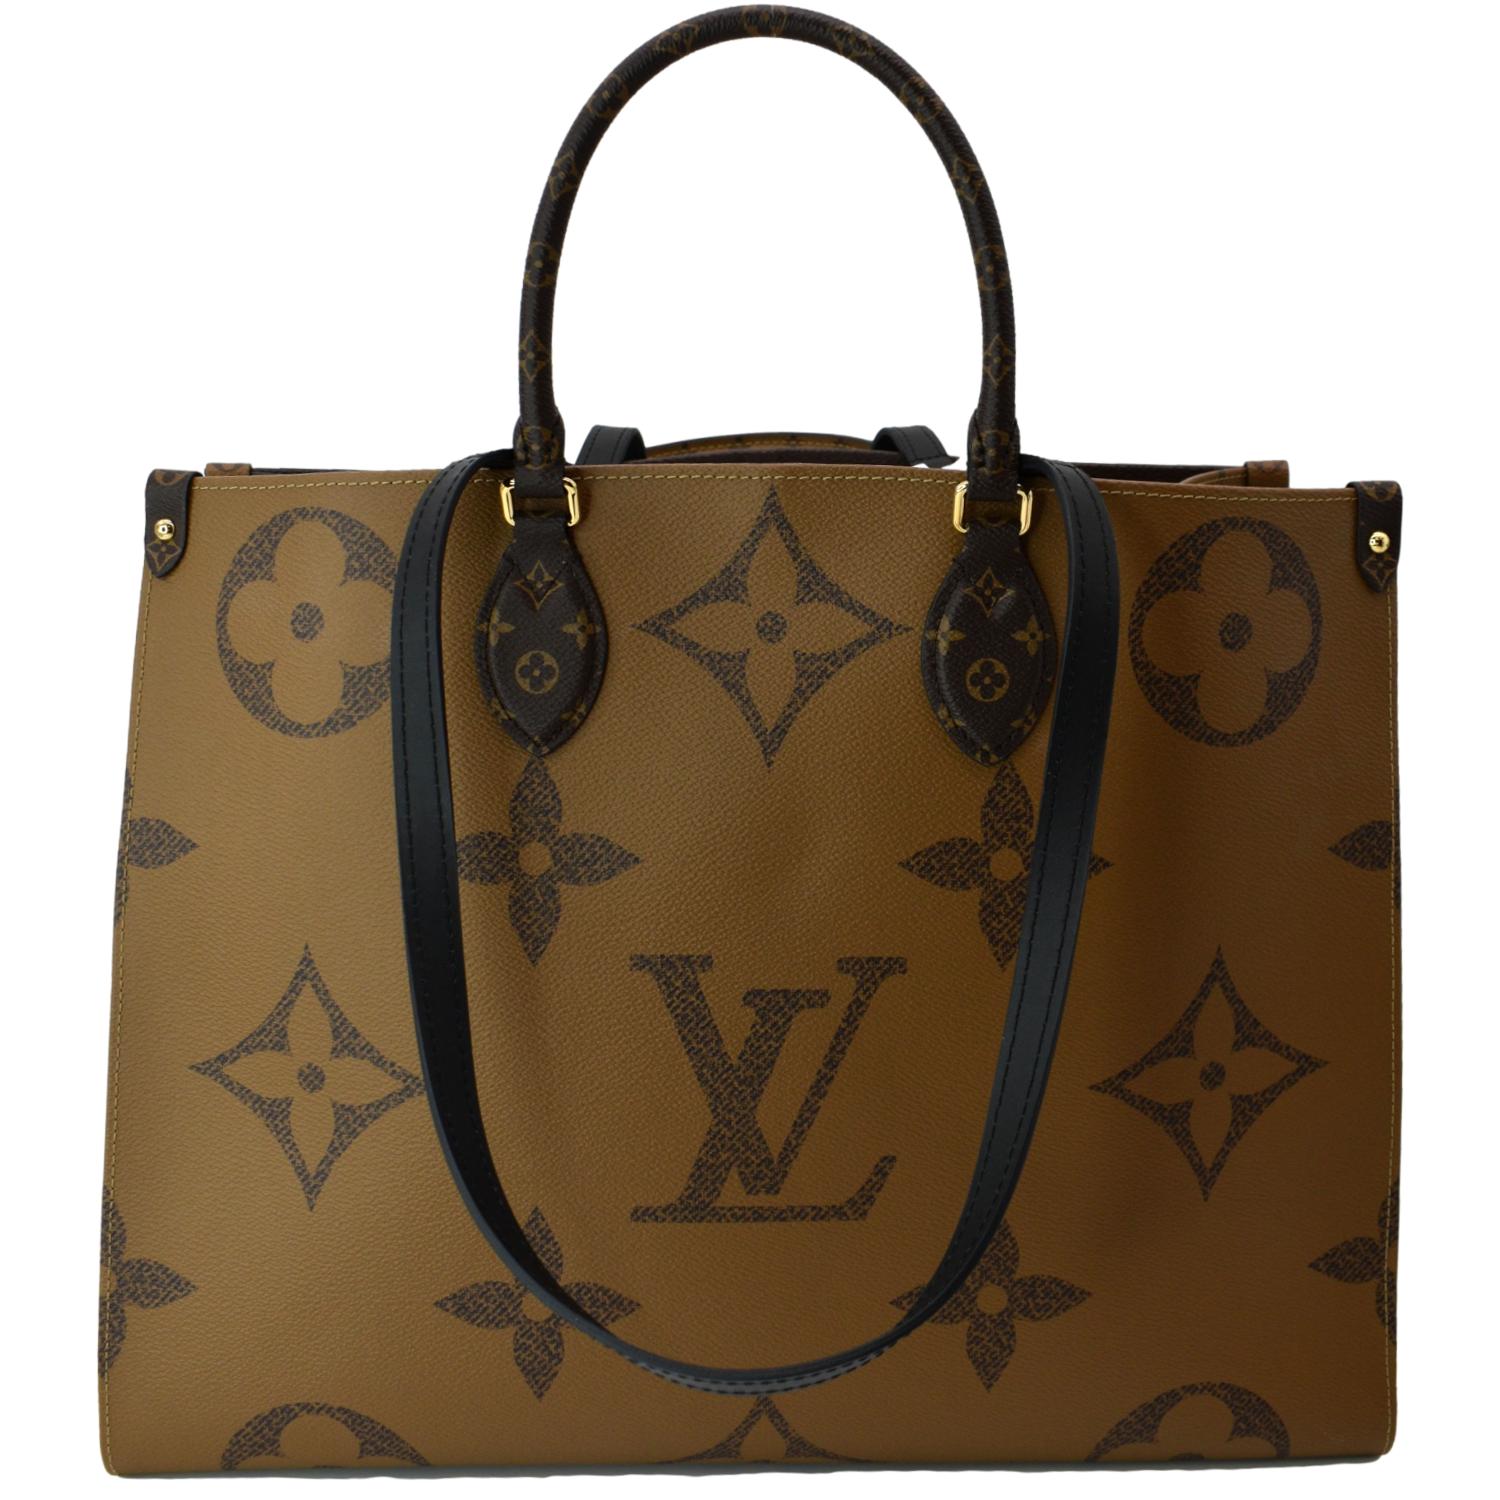 LOUIS VUITTON On the Go GM Tote Bag M44576